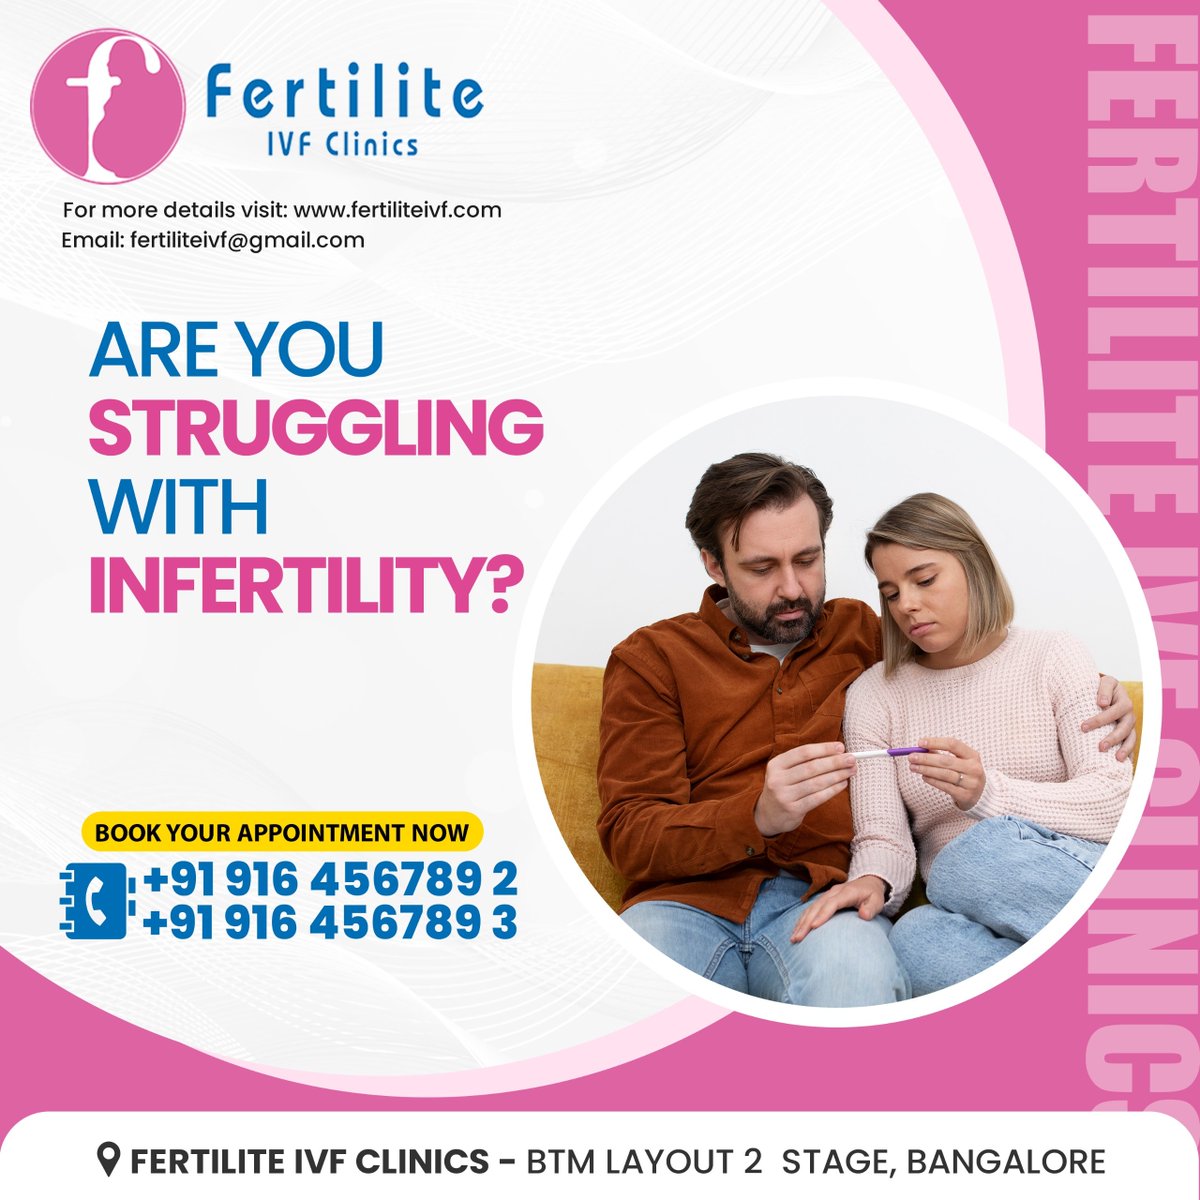 🌟 **Fertilite IVF Clinics** 🌟

Are you struggling with infertility? We're here to help!

📞 **BOOK YOUR APPOINTMENT NOW:**
+91 91645 67892 | +91 91645 67893

For more details, visit: fertiliteivf.com
📧 **Email:** fertiliteivf@gmail.com

#FertiliteIVFClinics #Infertility